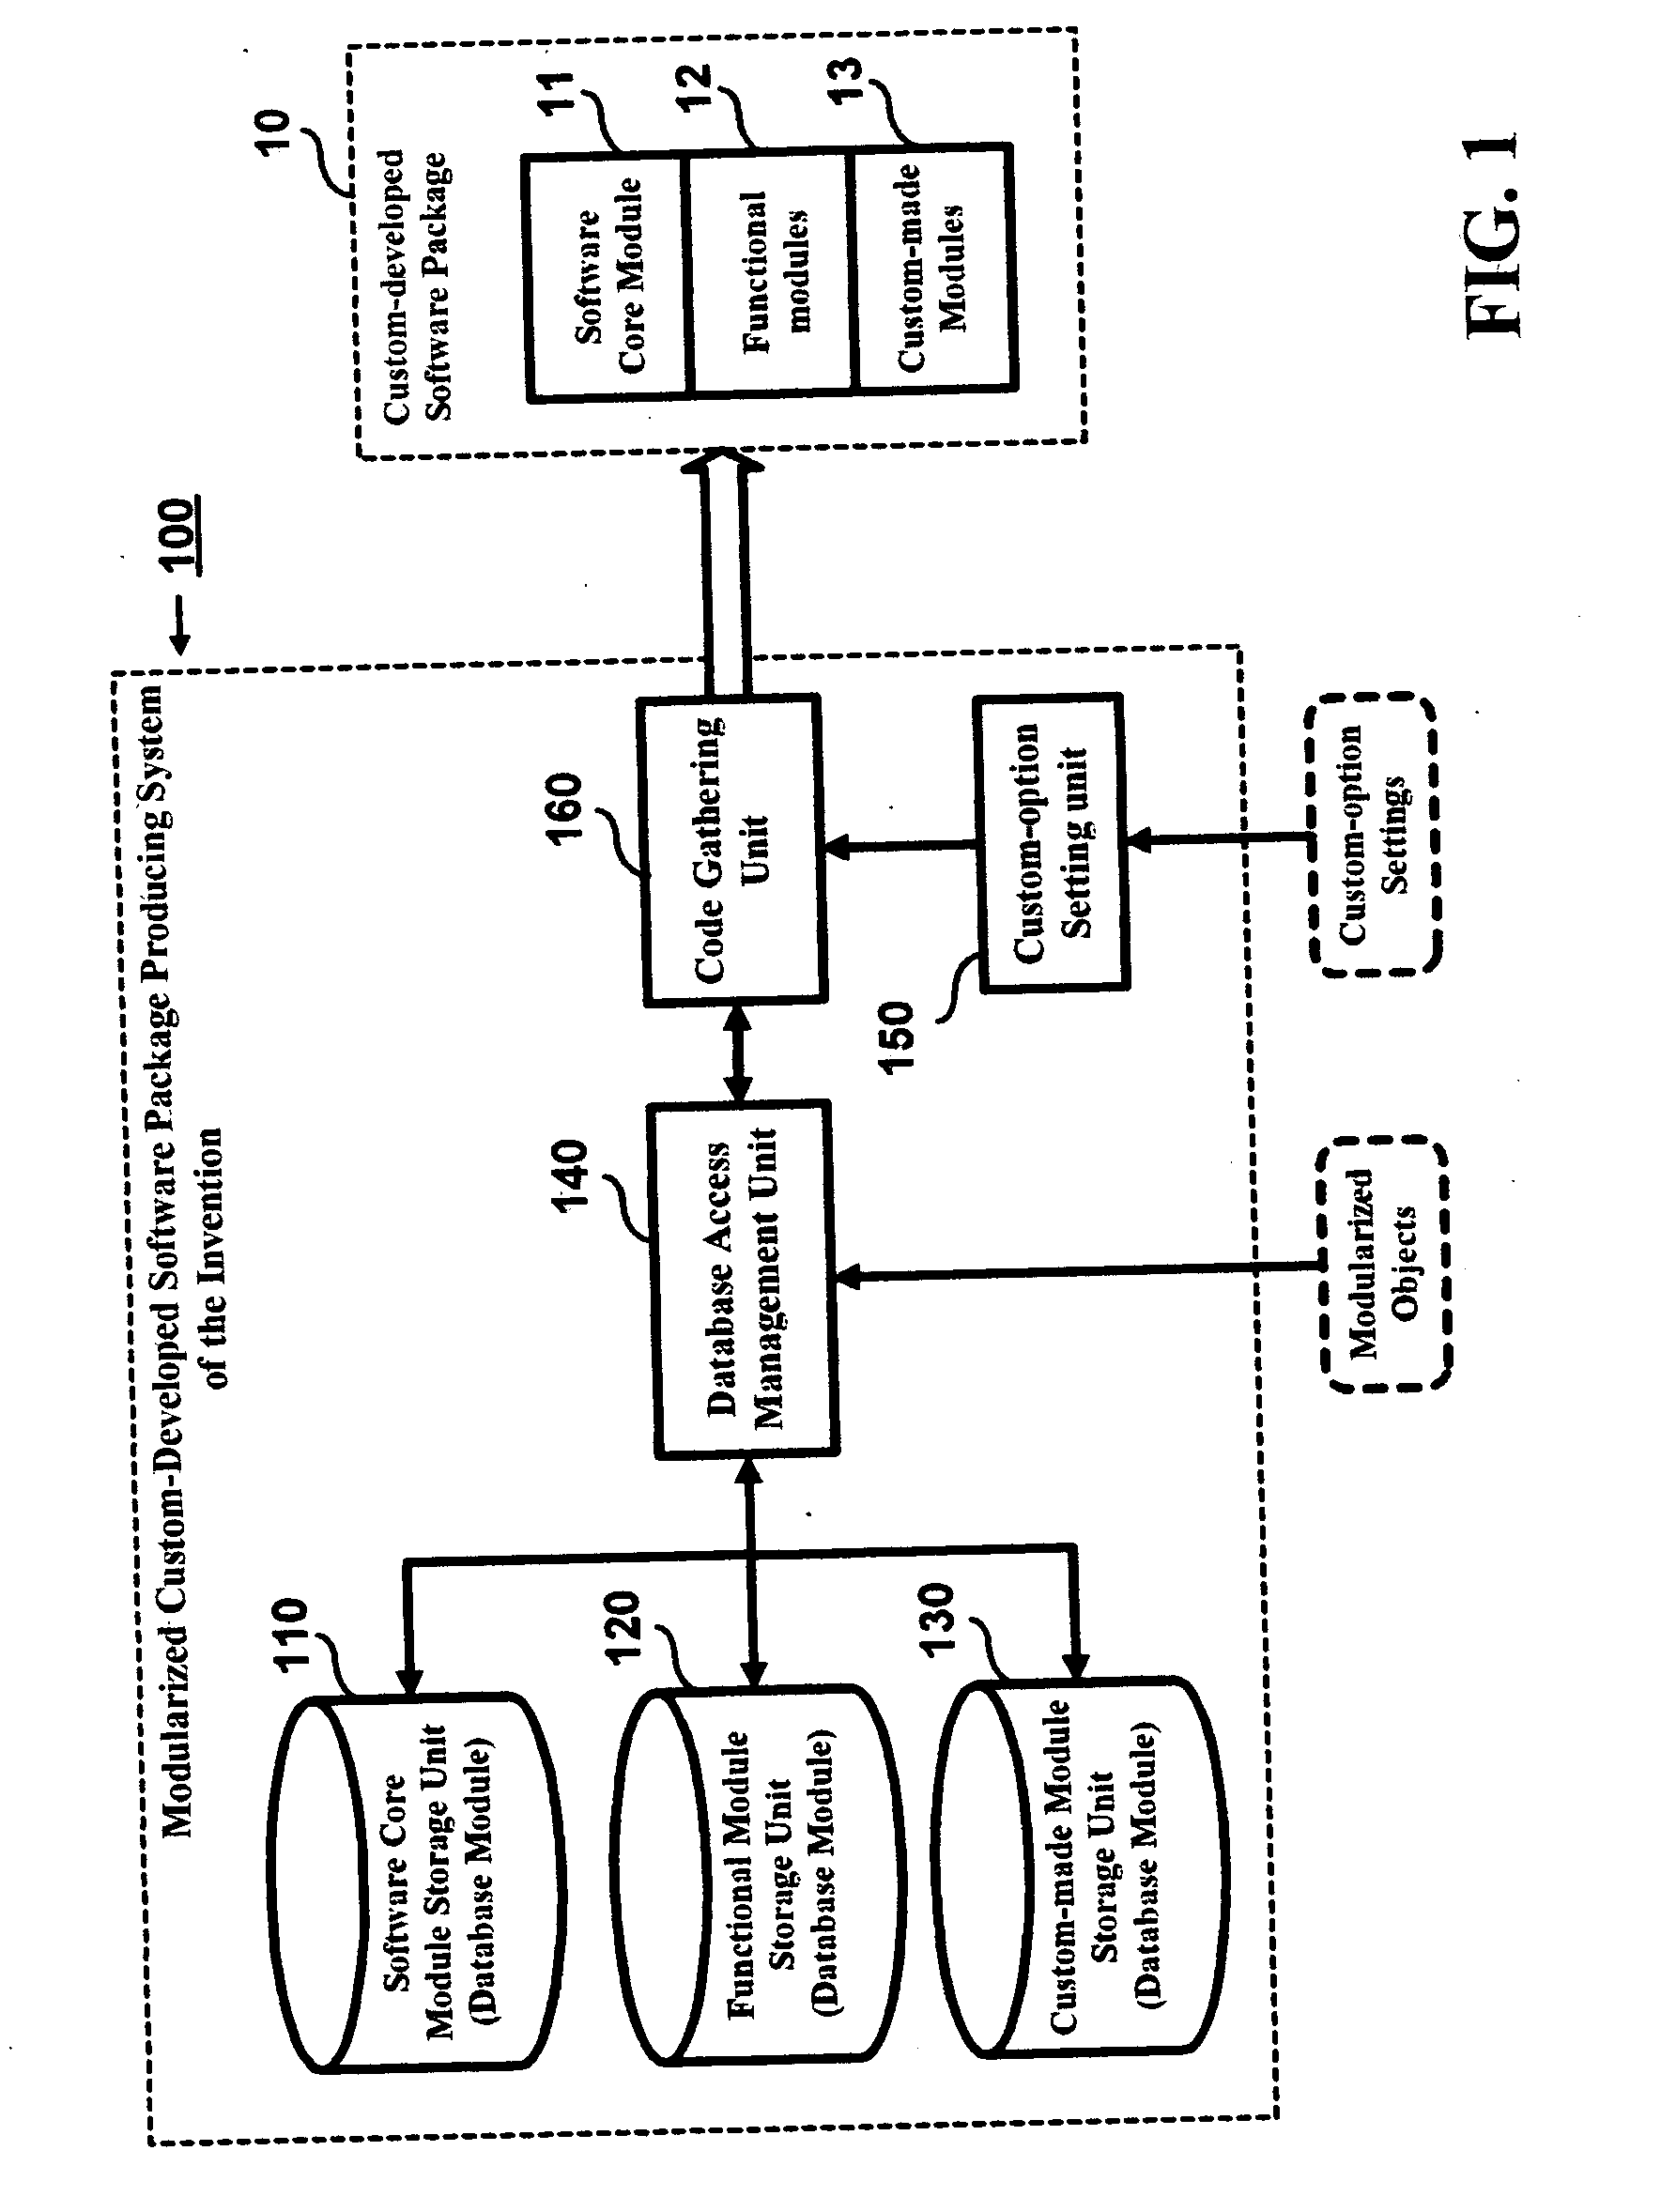 Modularized custom-developed software package producing method and system